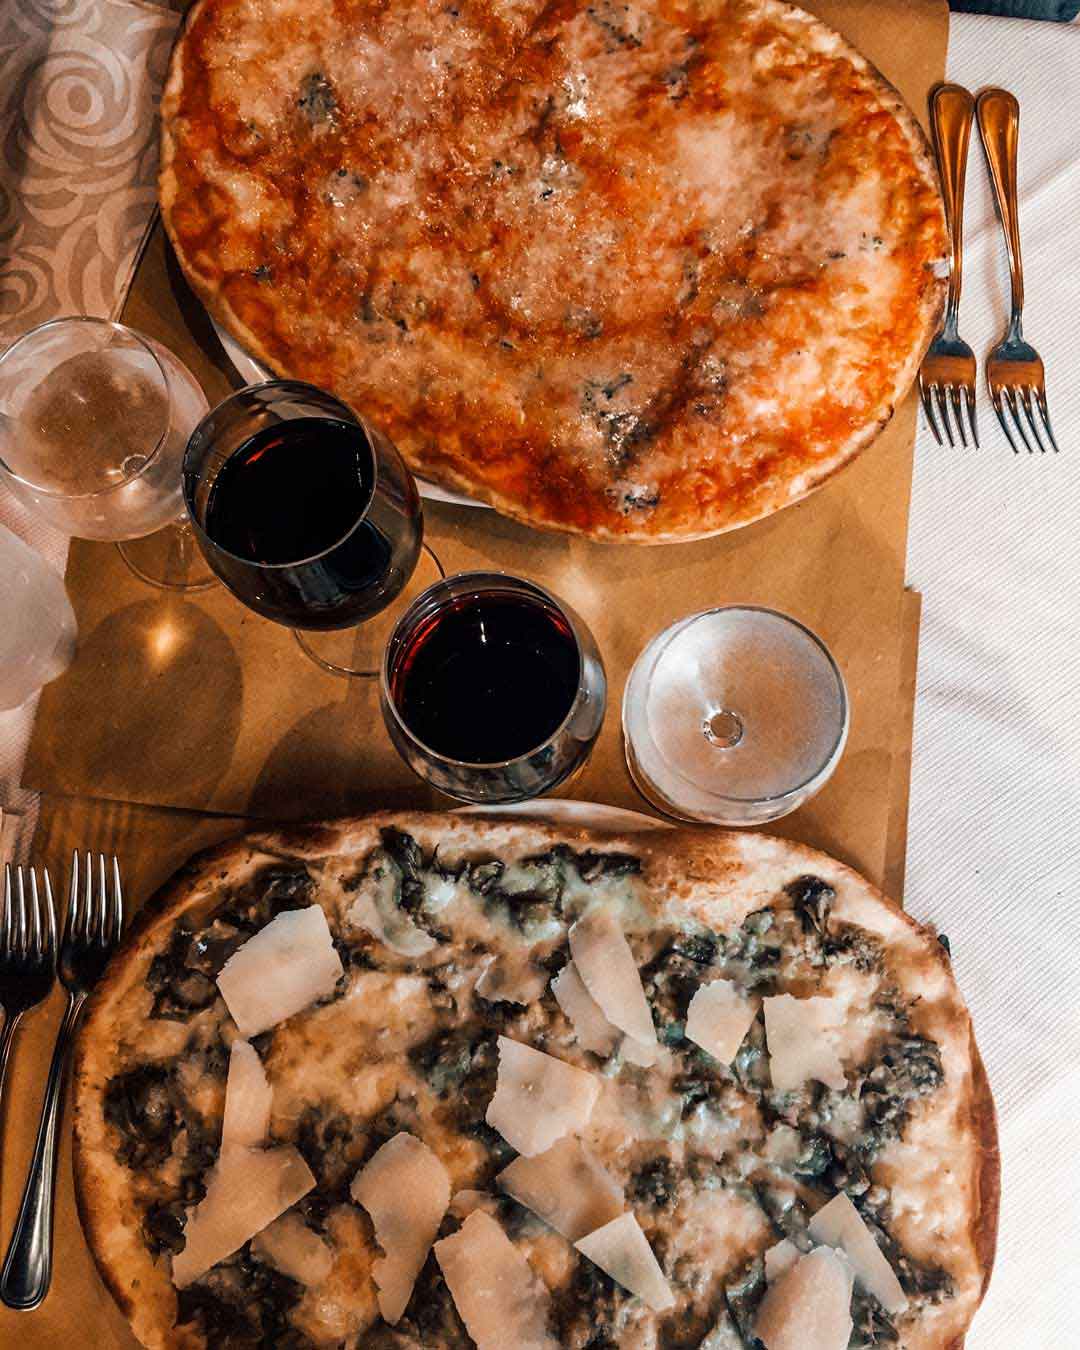 Two pizzas at one of the best restaurants in Trastevere